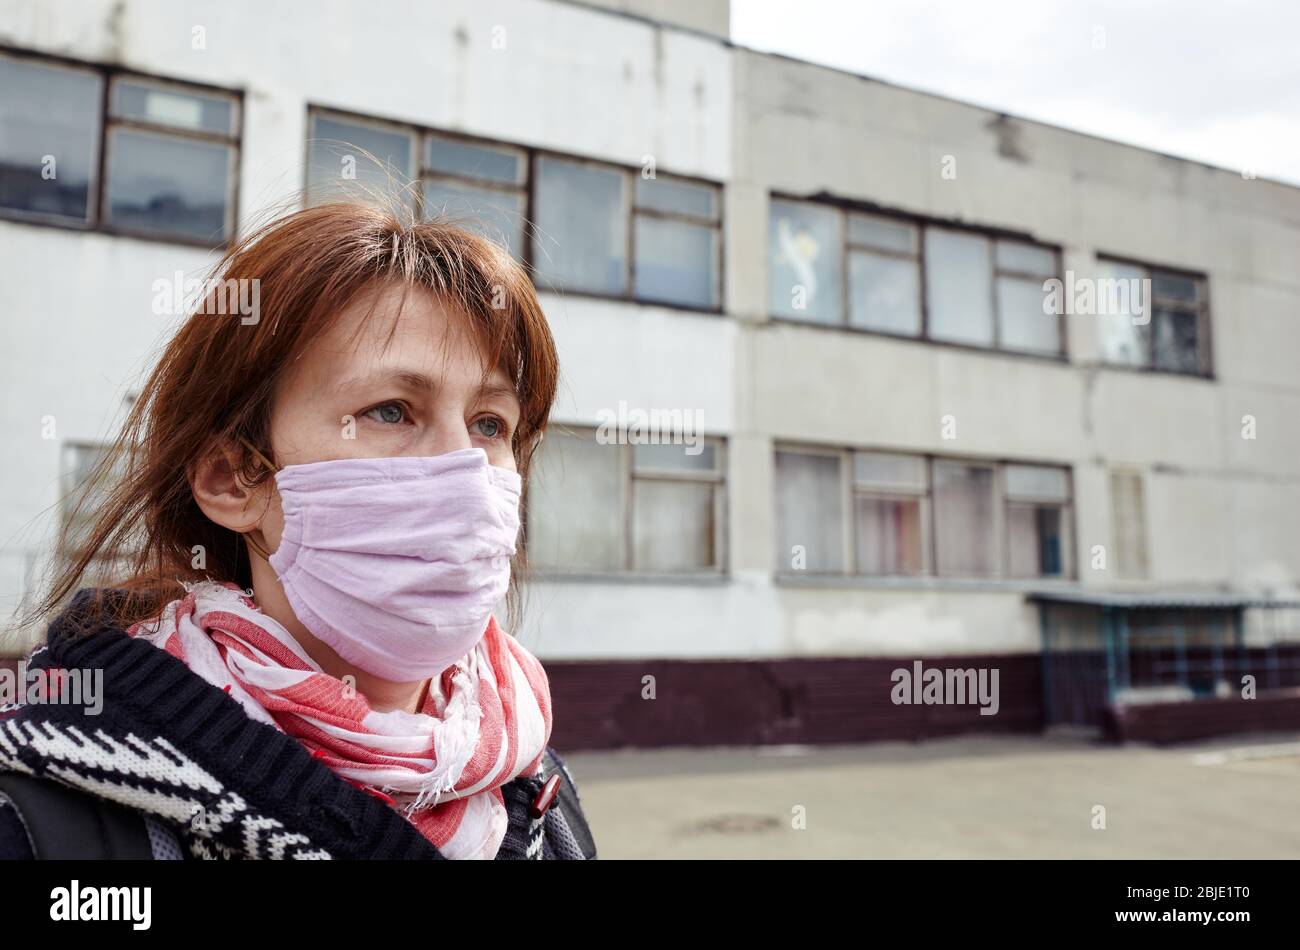 Woman wearing hygienic mask to prevent the Coronavirus. People in masks The outbreak of Novel Corona virus (2019-nCoV) in Europe. Stock Photo